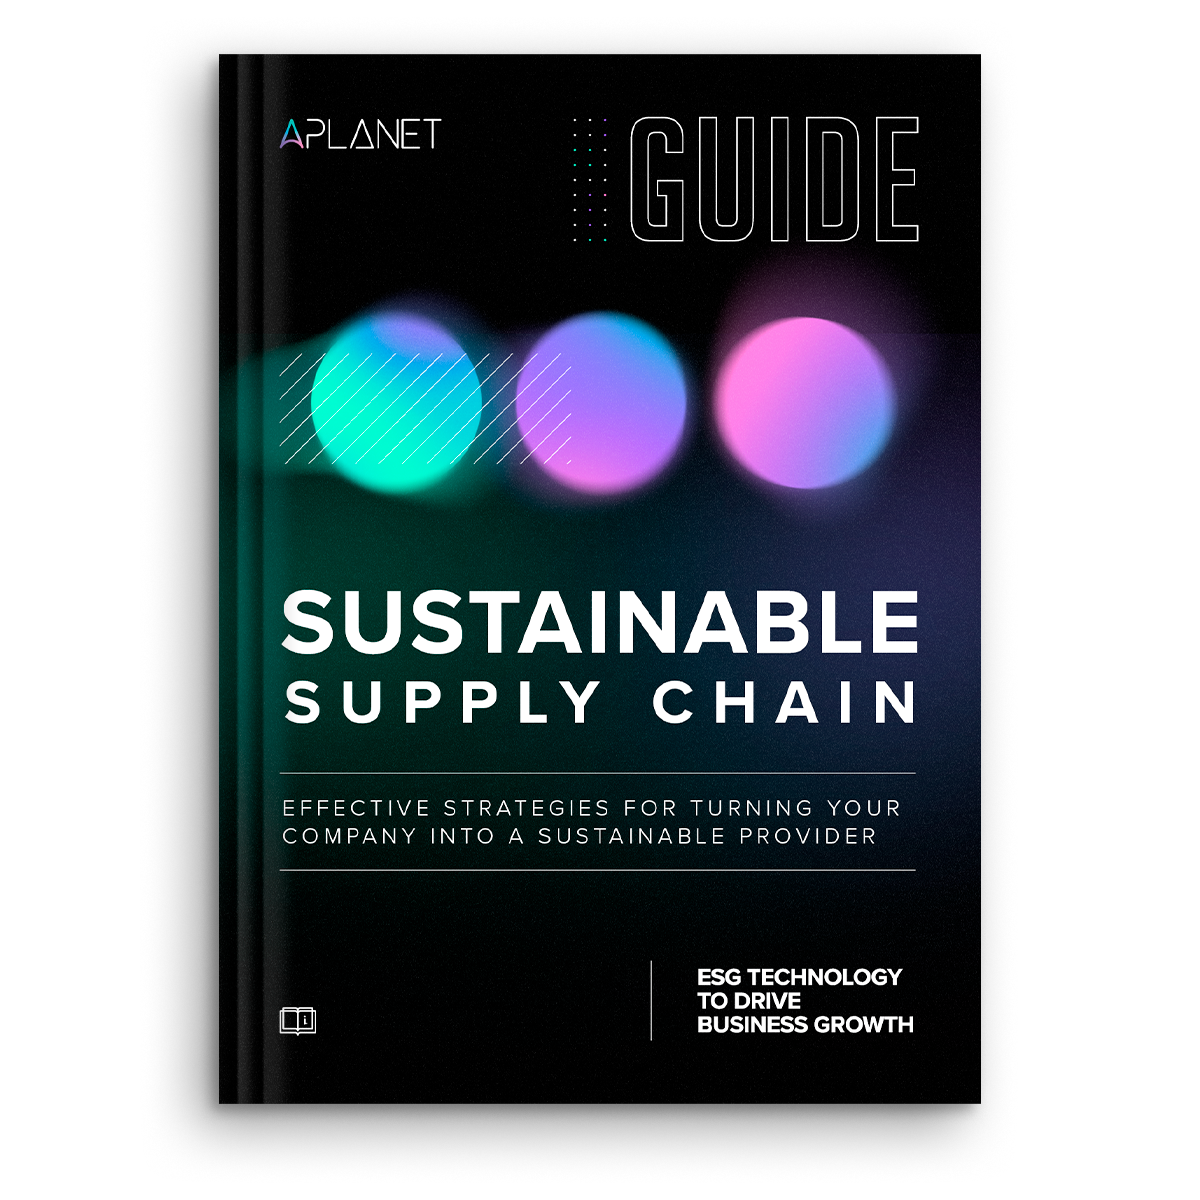 Sustainable Supply Chain Guide